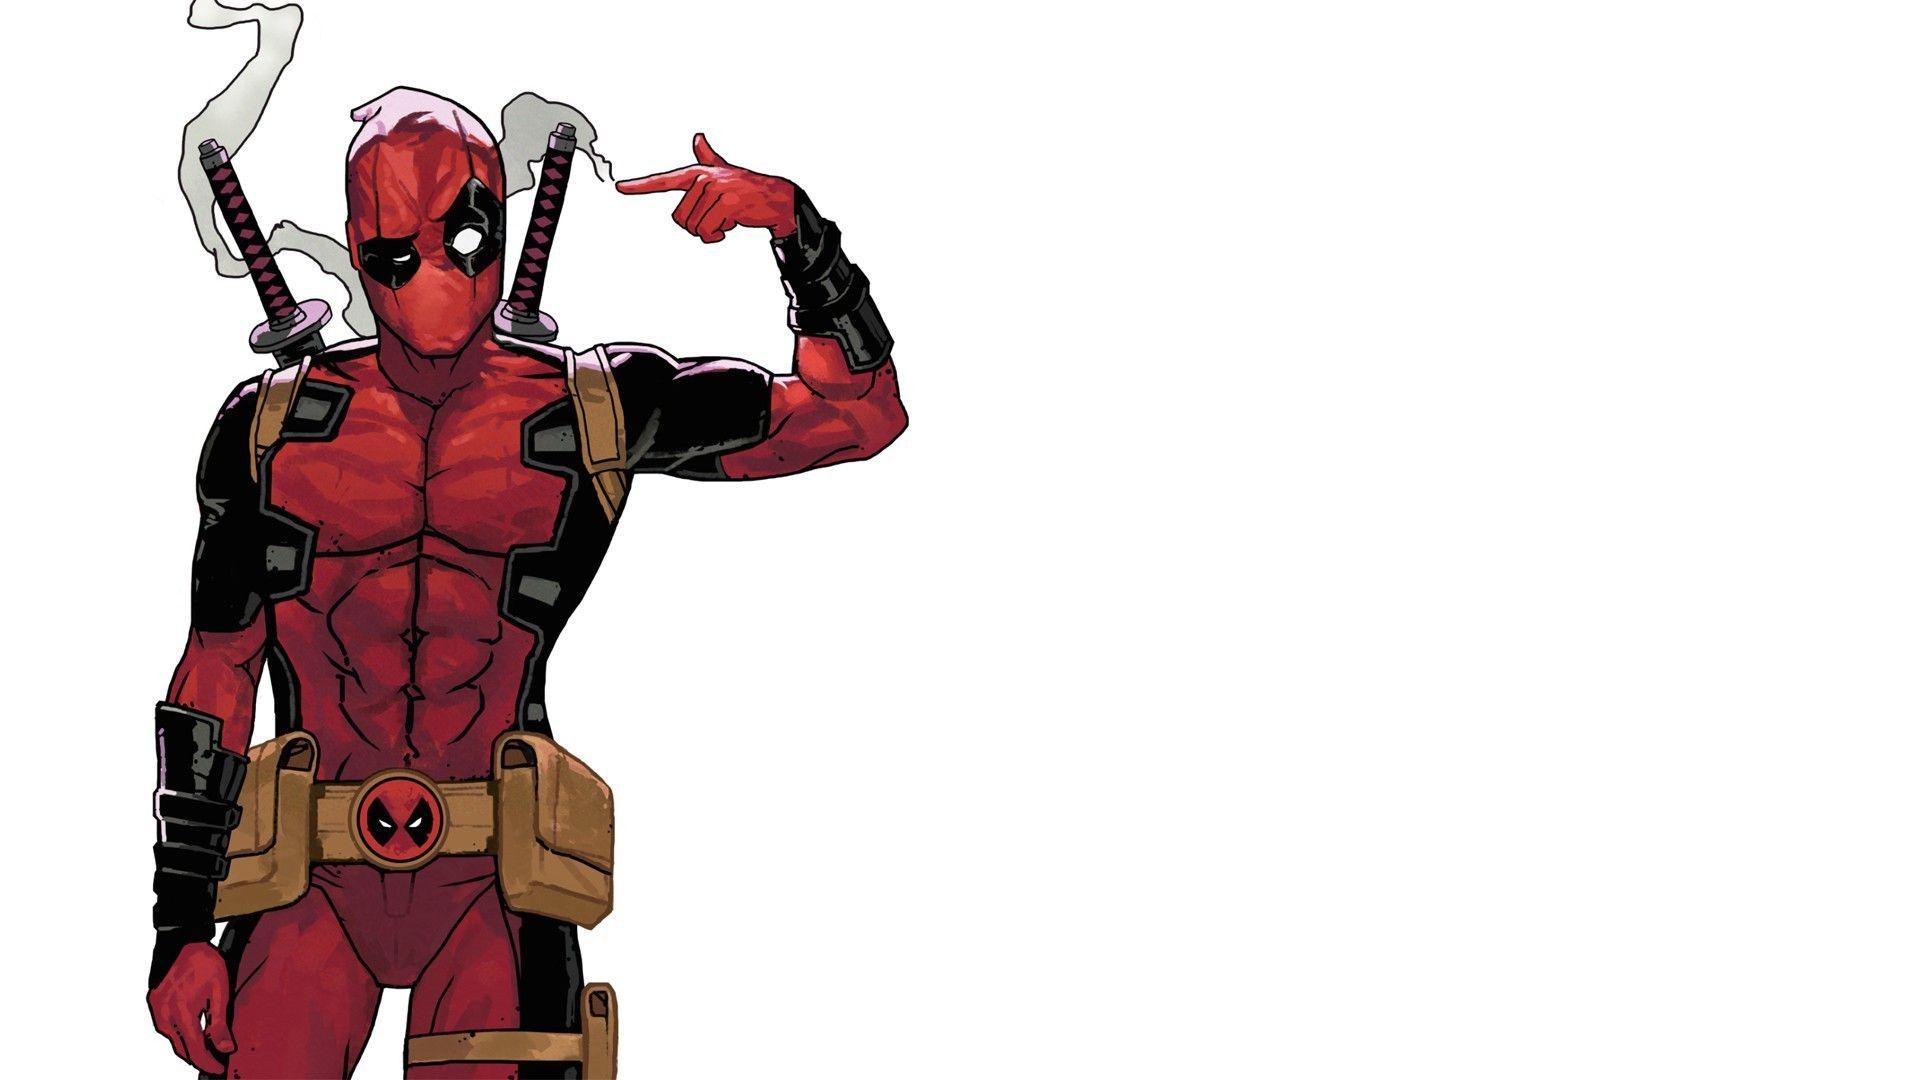 Download Deadpool in Action - The Cartoony Merc with a Mouth Wallpaper |  Wallpapers.com